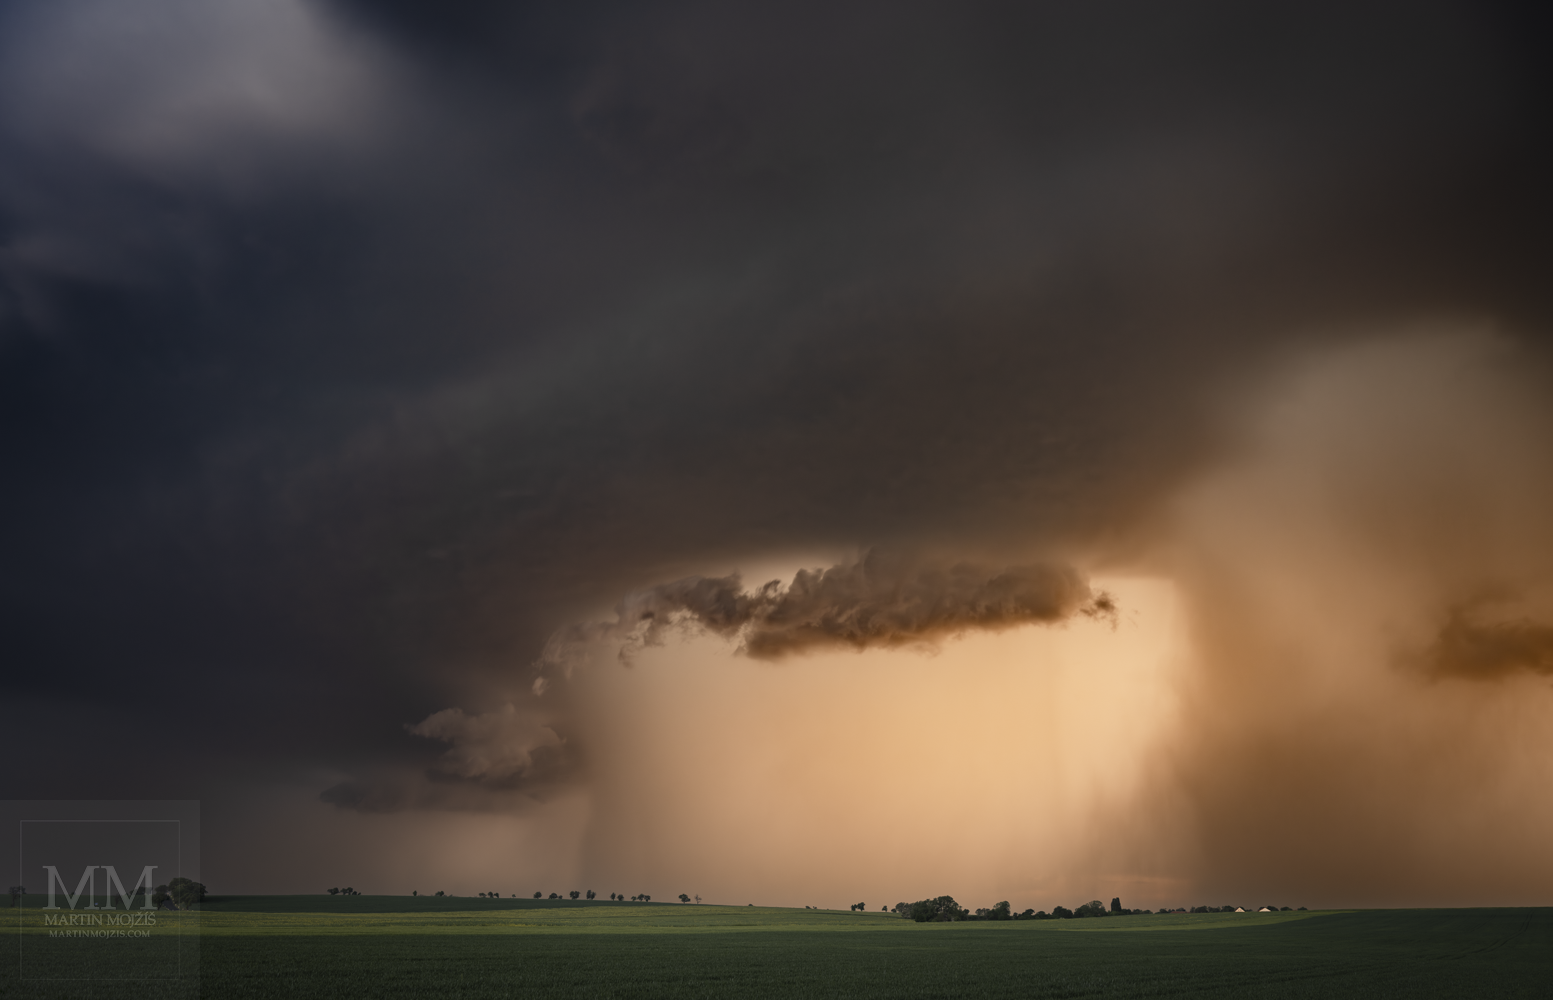 Supercell, supercell storm - a storm cloud and a rotating stream of air over the landscape. Fine Art large format photograph Supercell. Photographer Martin Mojzis.